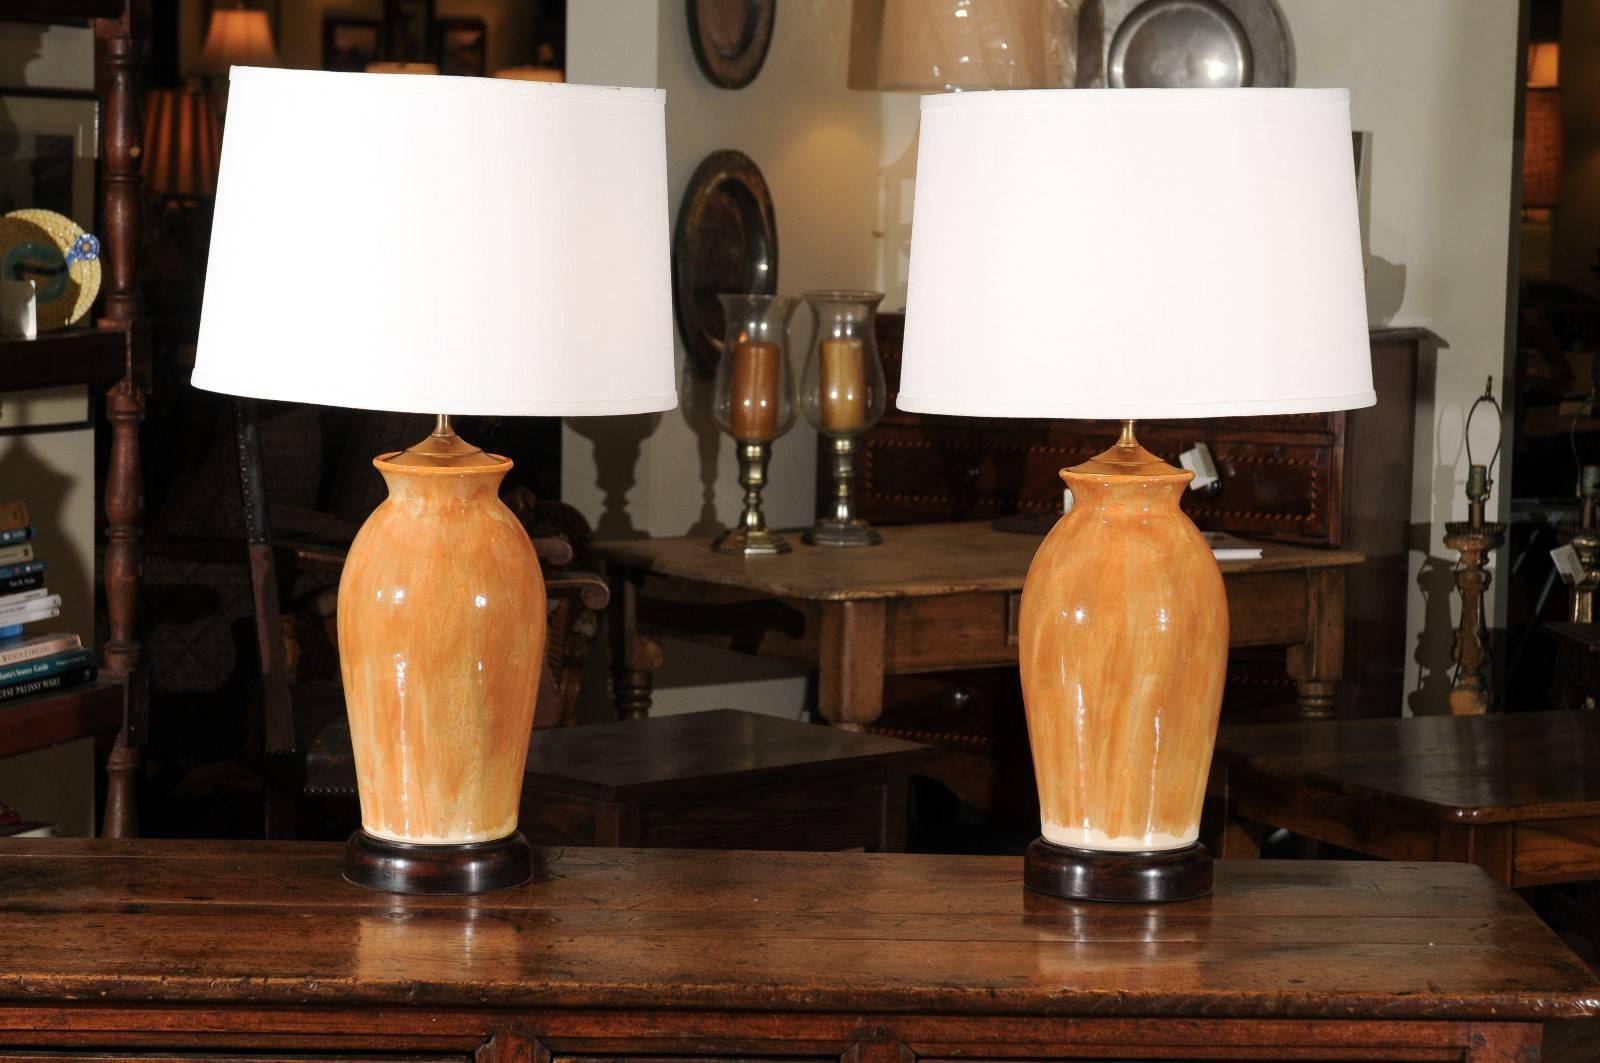 This is a lovely pair of hand-thrown and glazed lamps. The color is one of a kind and can't be replicated. The potter has been in business, since 1986.